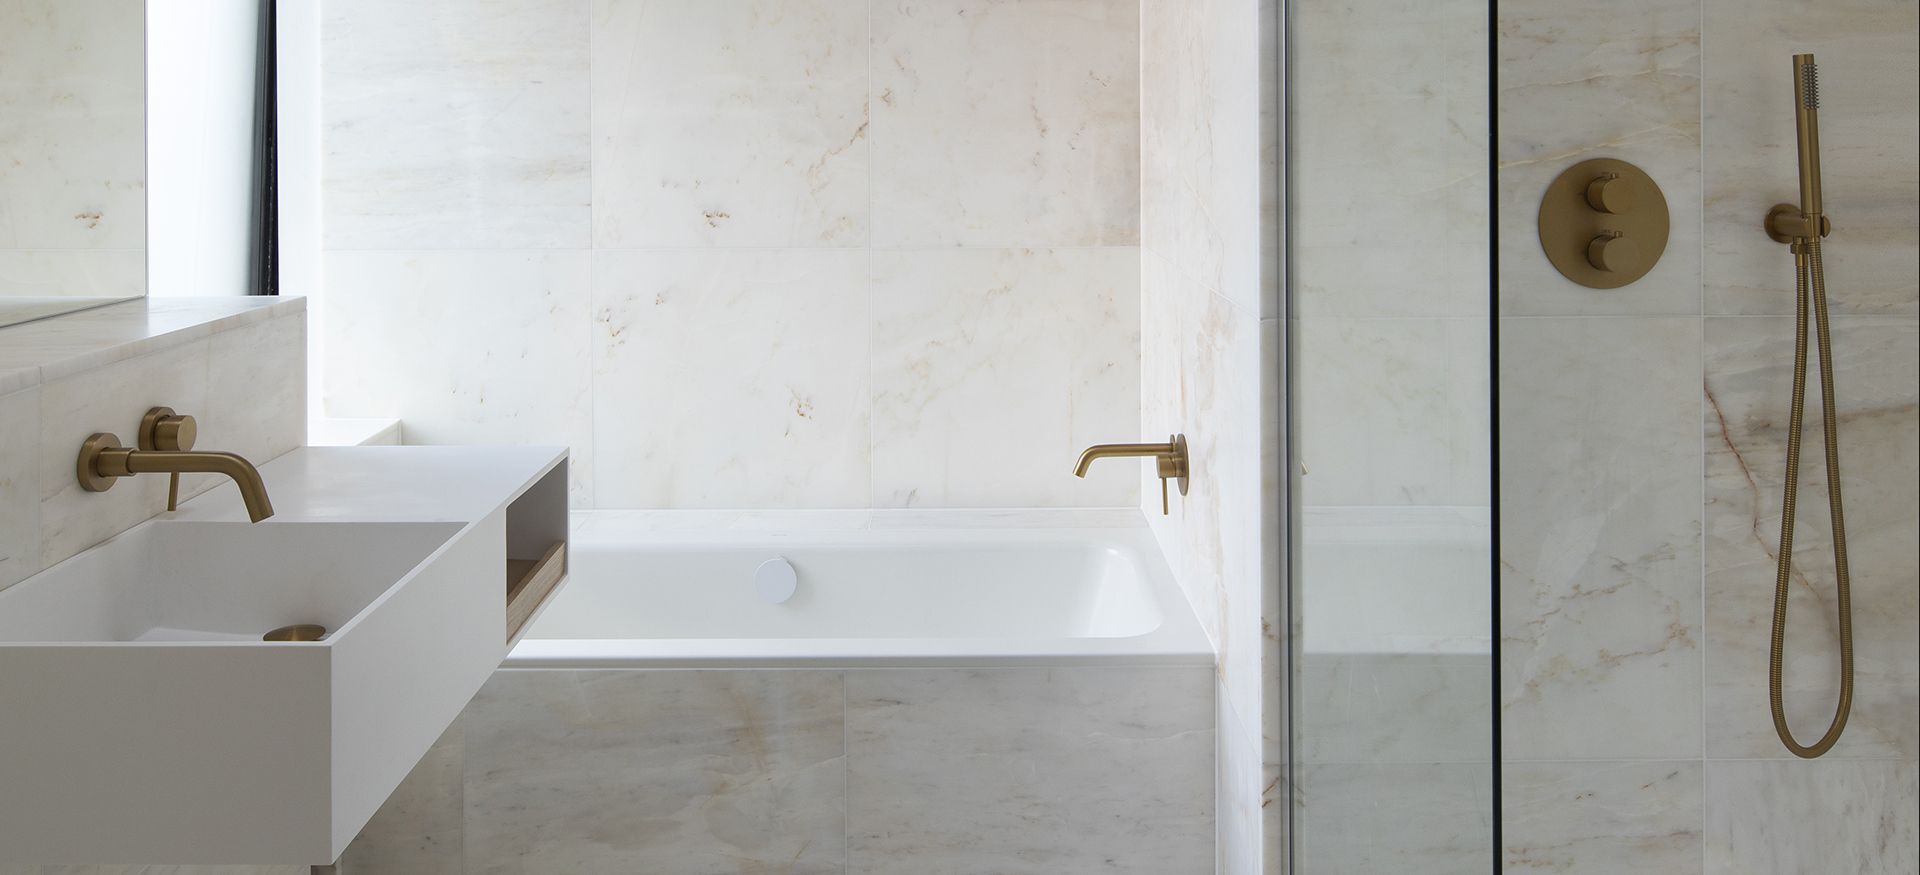 The most luxurious of bathrooms with the best finish and materials